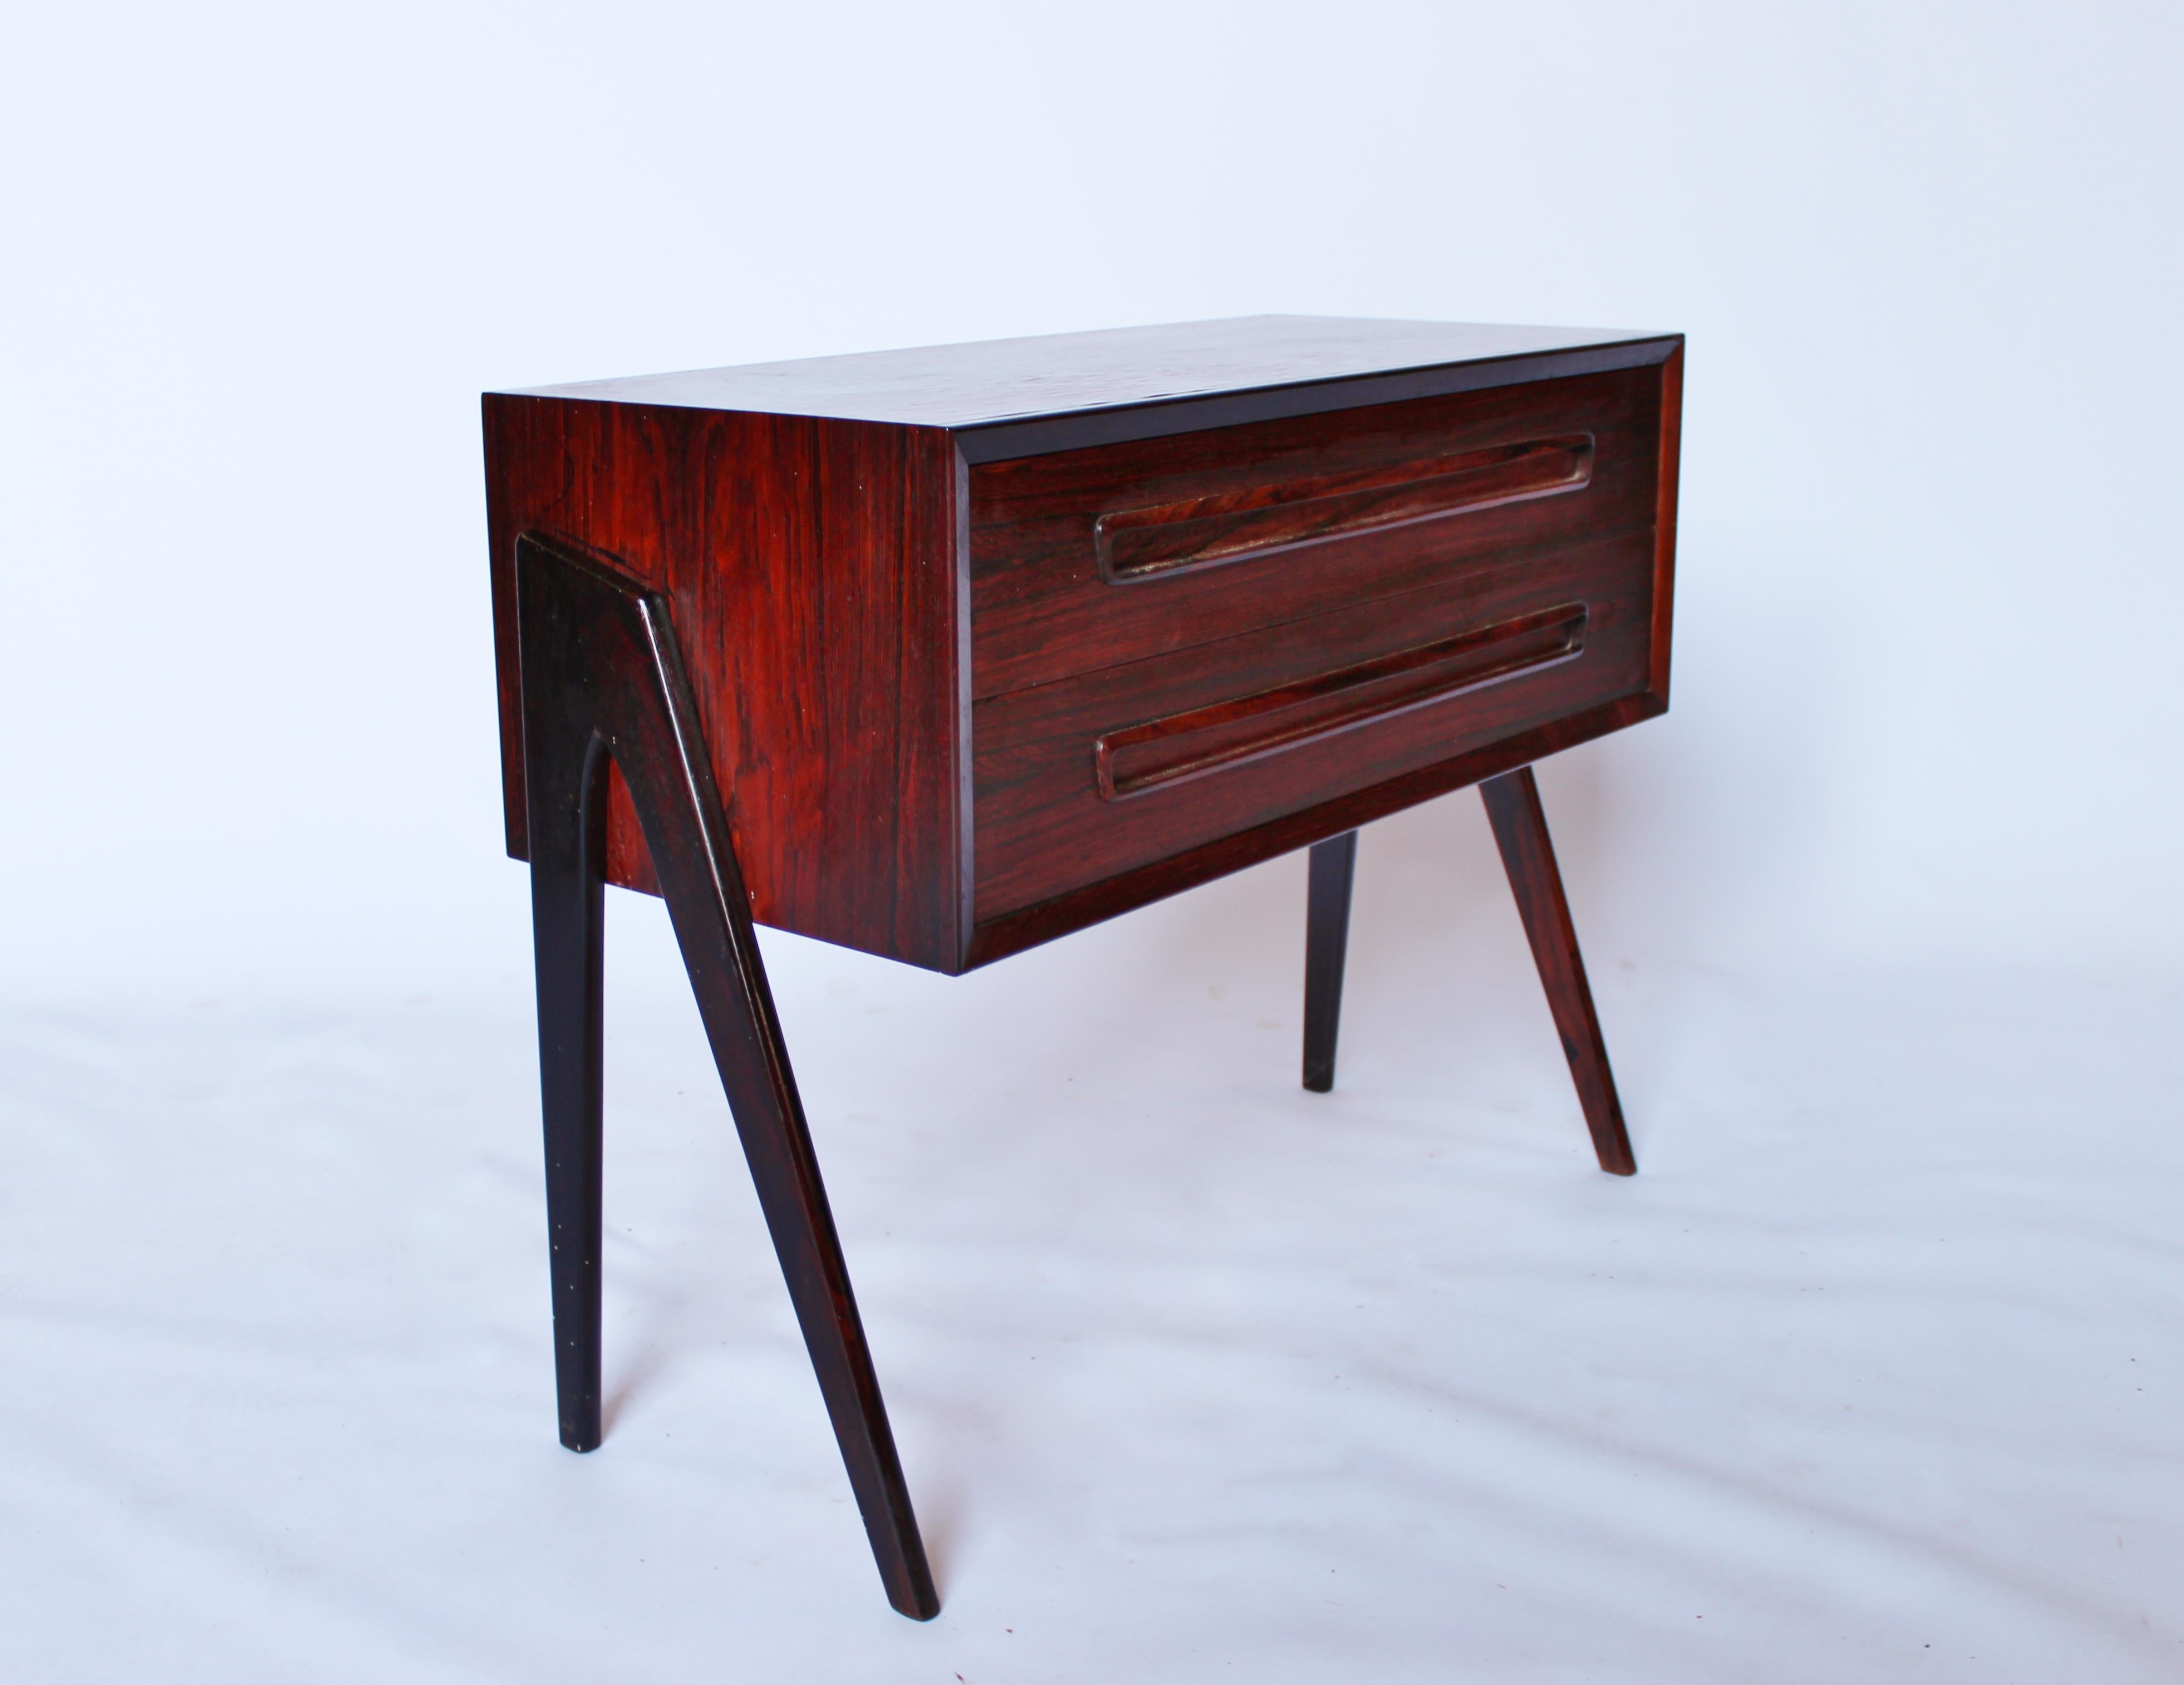 Small rosewood chest of drawers with two drawers of Danish design from the 1960s. The chest is in great vintage condition.